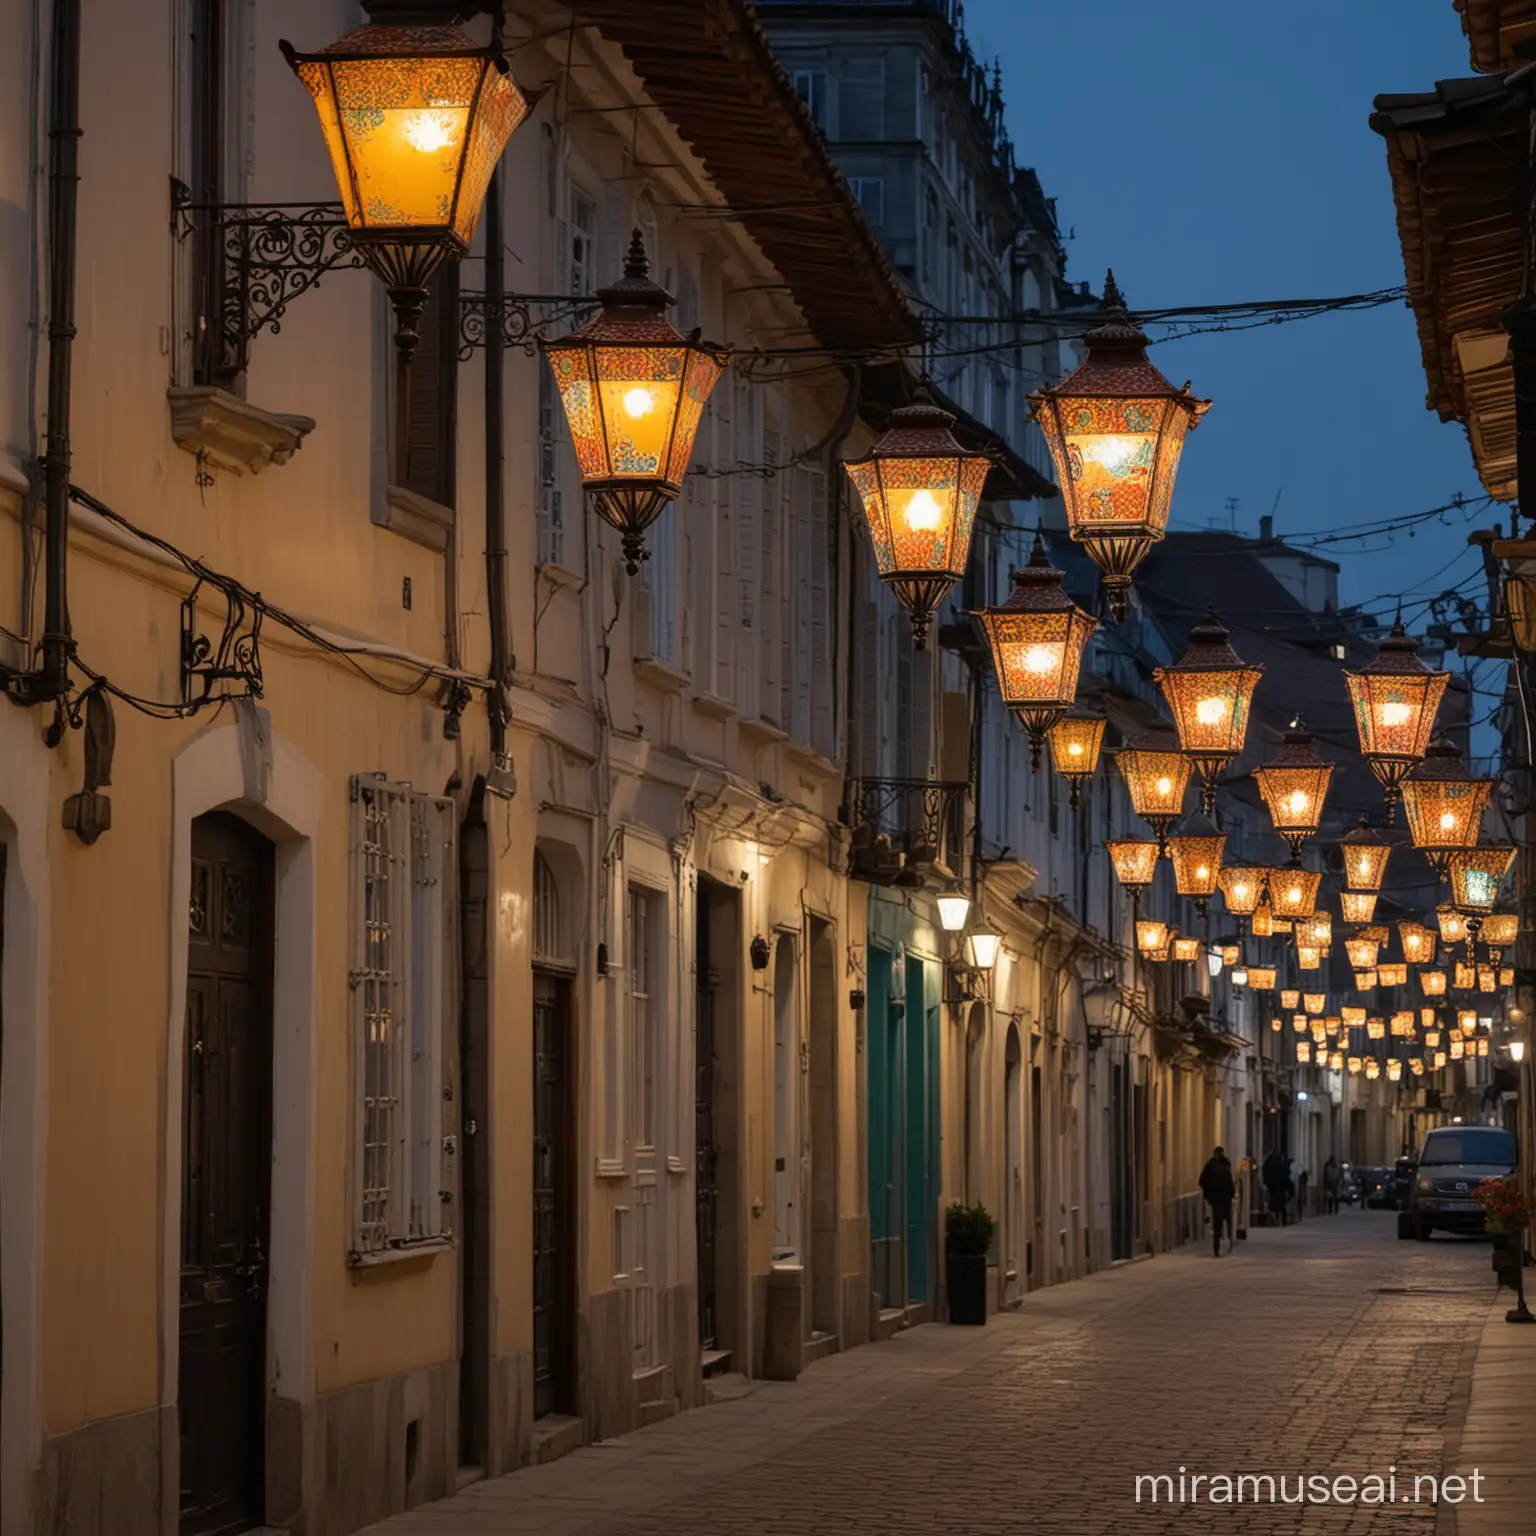 A street with many street lamps, with traditional patterned lampshades with trimmings